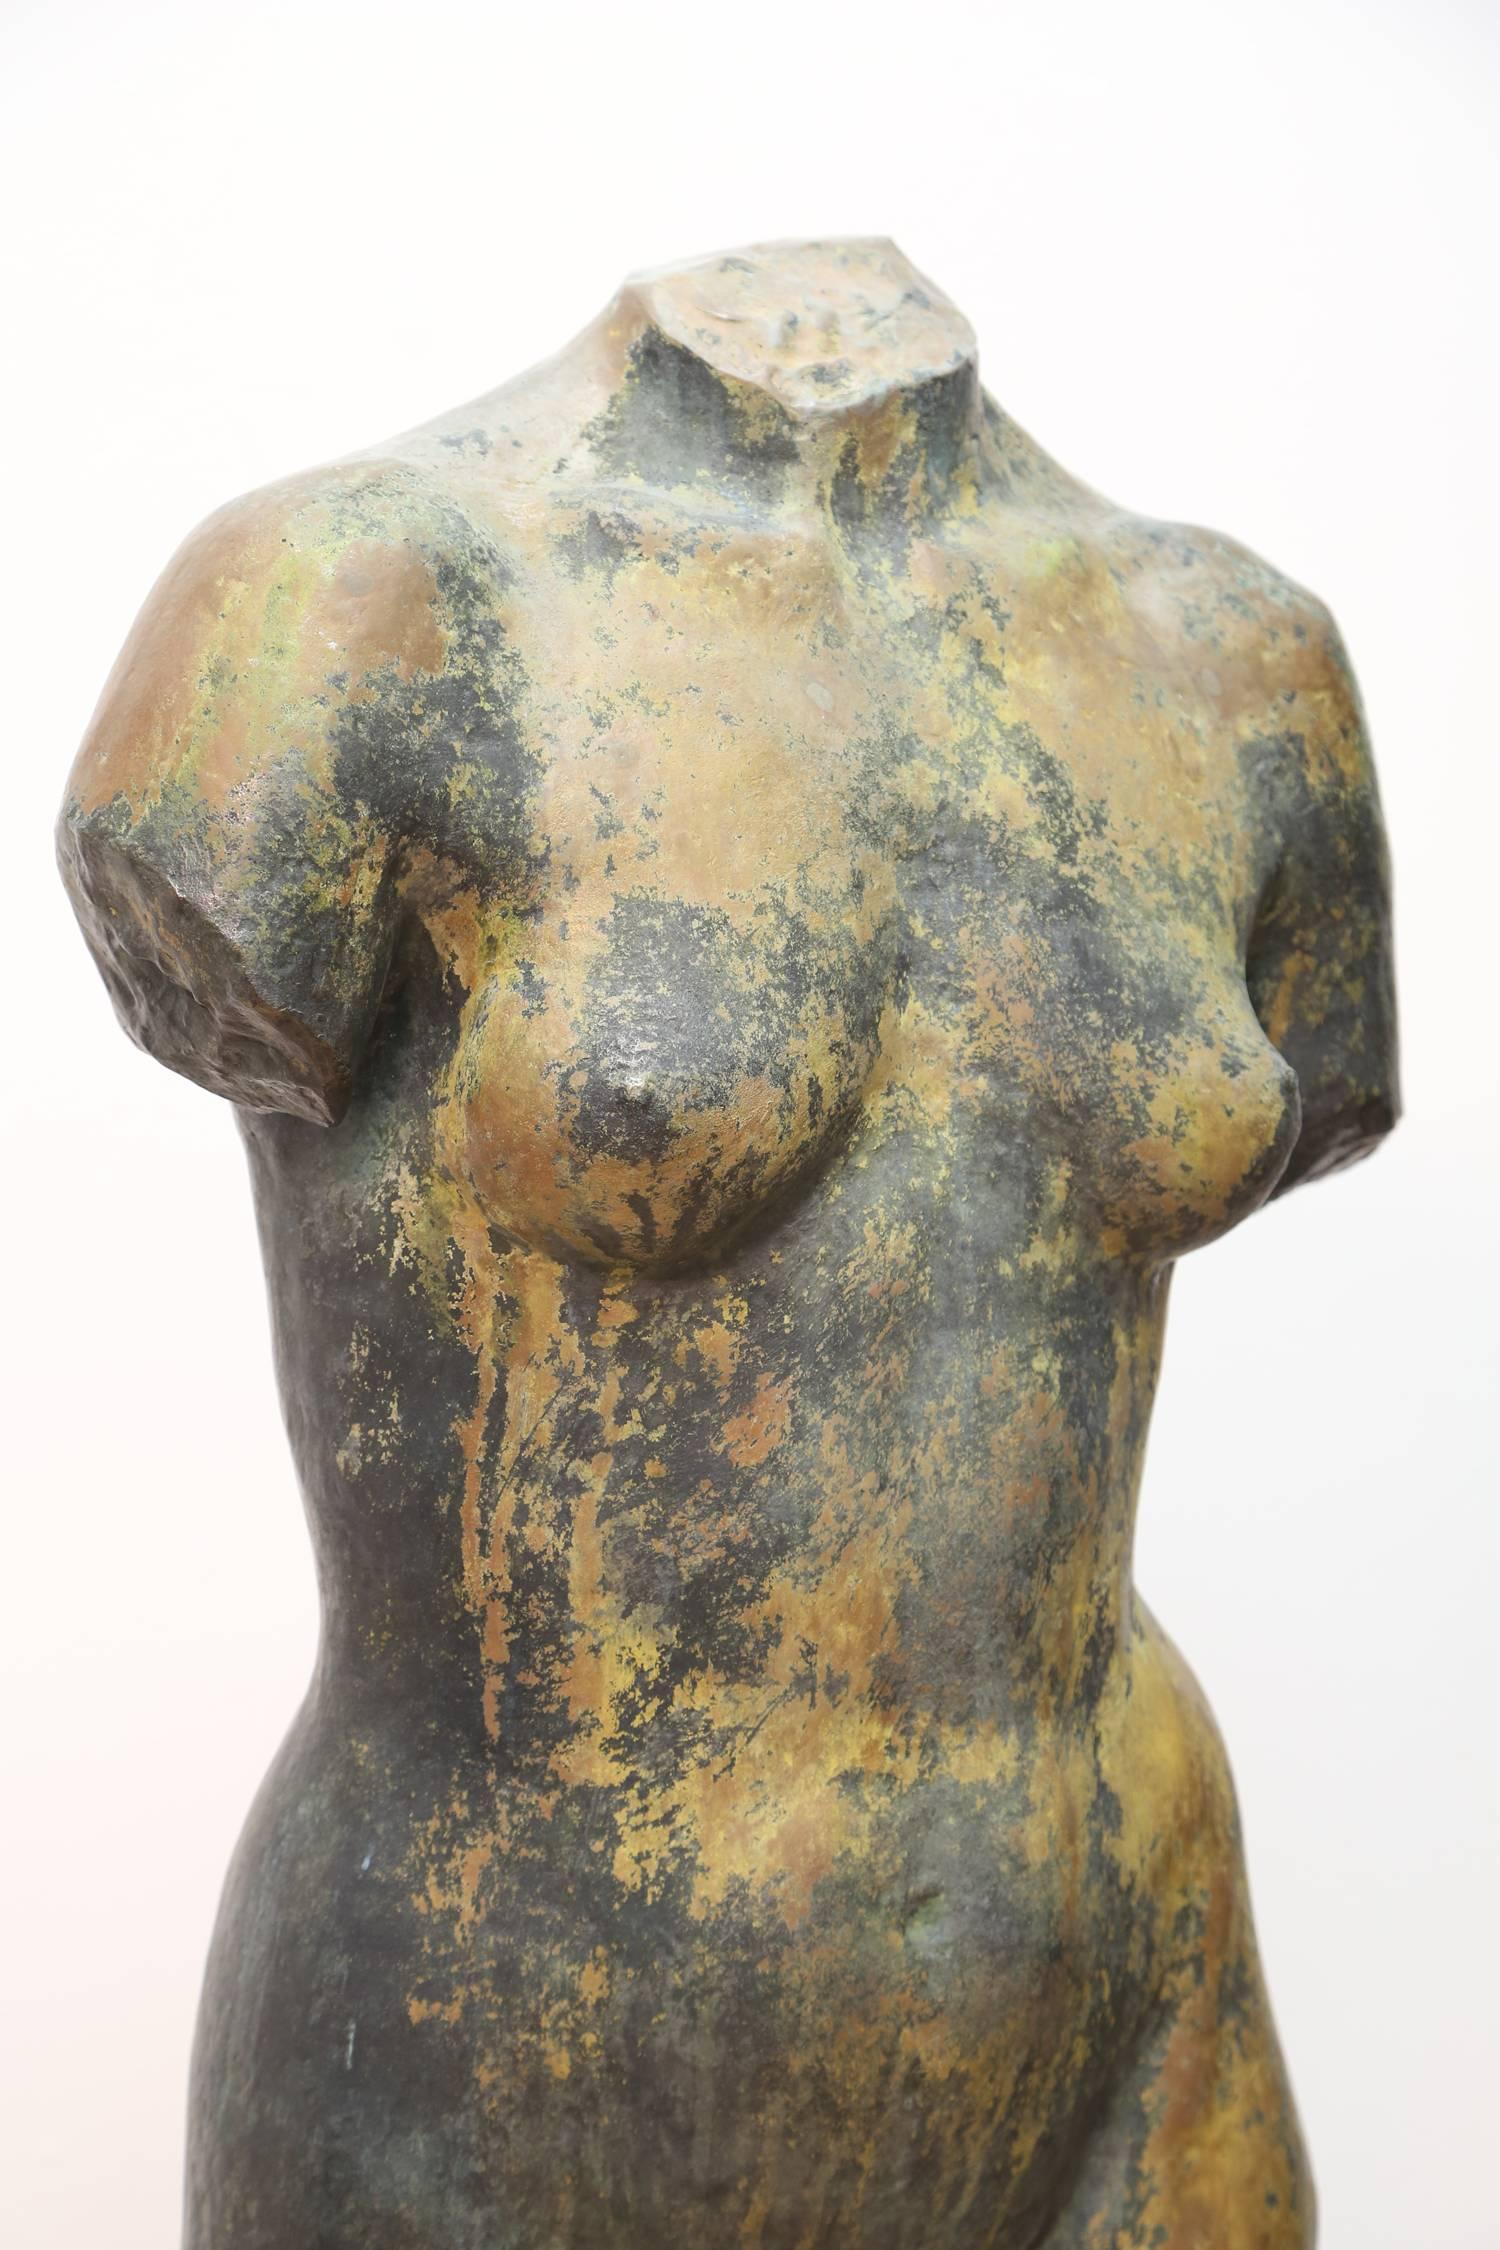 Lifesize Bronze Sculpture by Georges Coulon 1